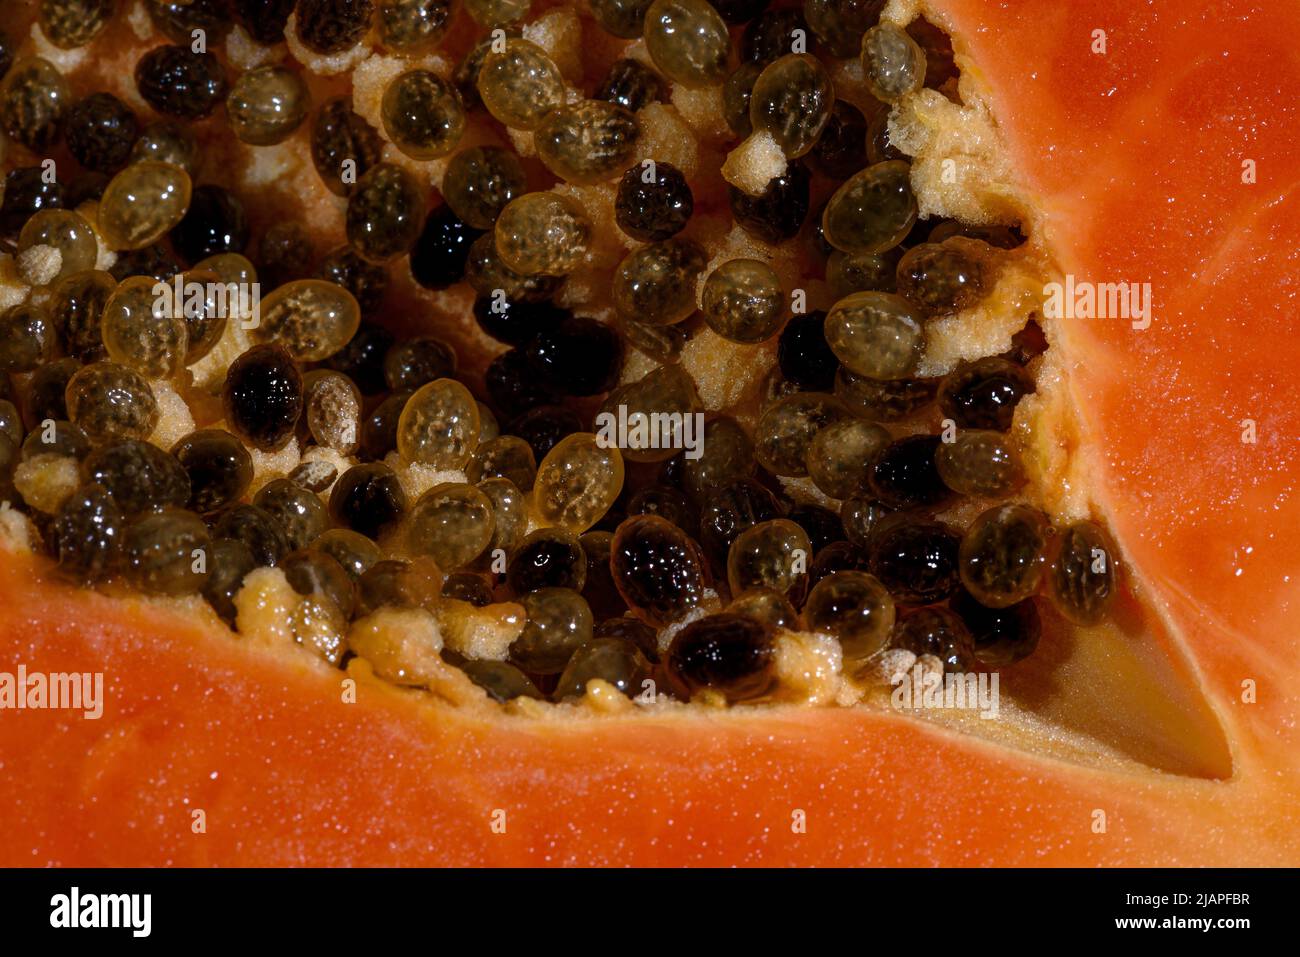 Detail of freshly cut Papaya. The papaya, papaw, or pawpaw is the plant Carica papaya, one of the 22 accepted species in the genus Carica of the family Caricaceae. It was first domesticated in Mesoamerica, within modern-day southern Mexico and Central America. In 2020, India produced 43% of the world supply of papayas. Stock Photo